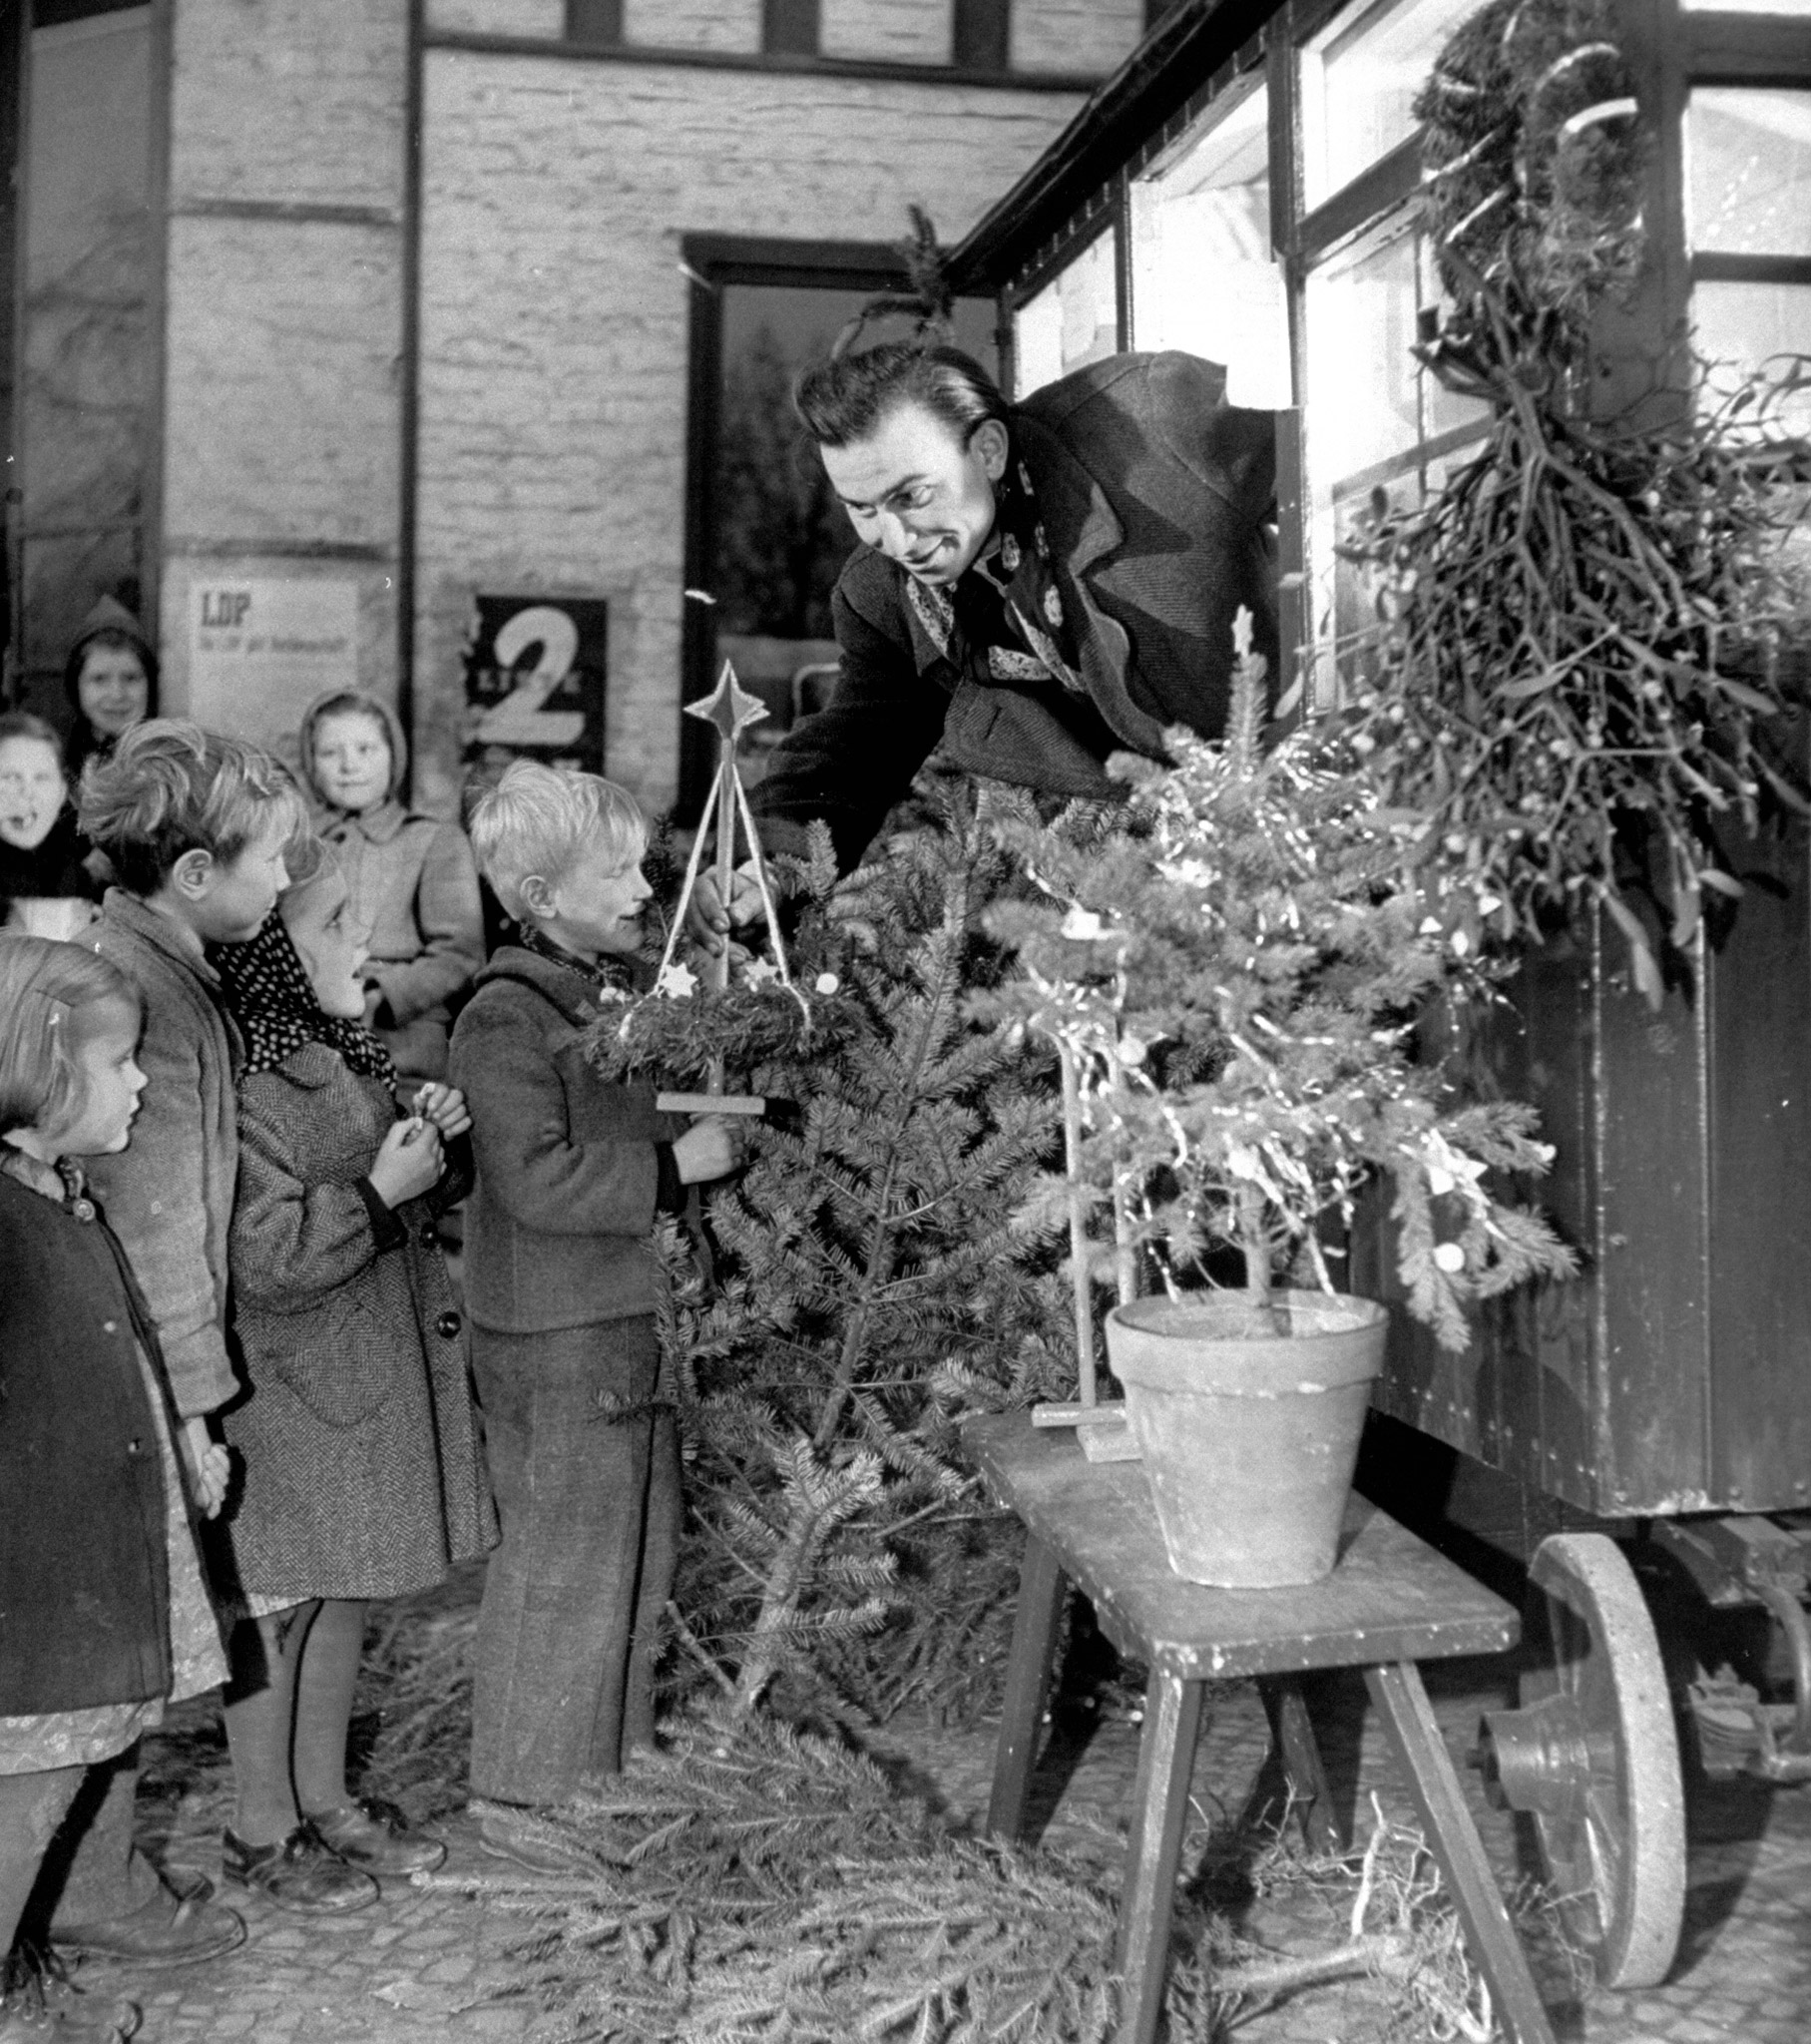 Man showing Christmas decorations to children, 1948.